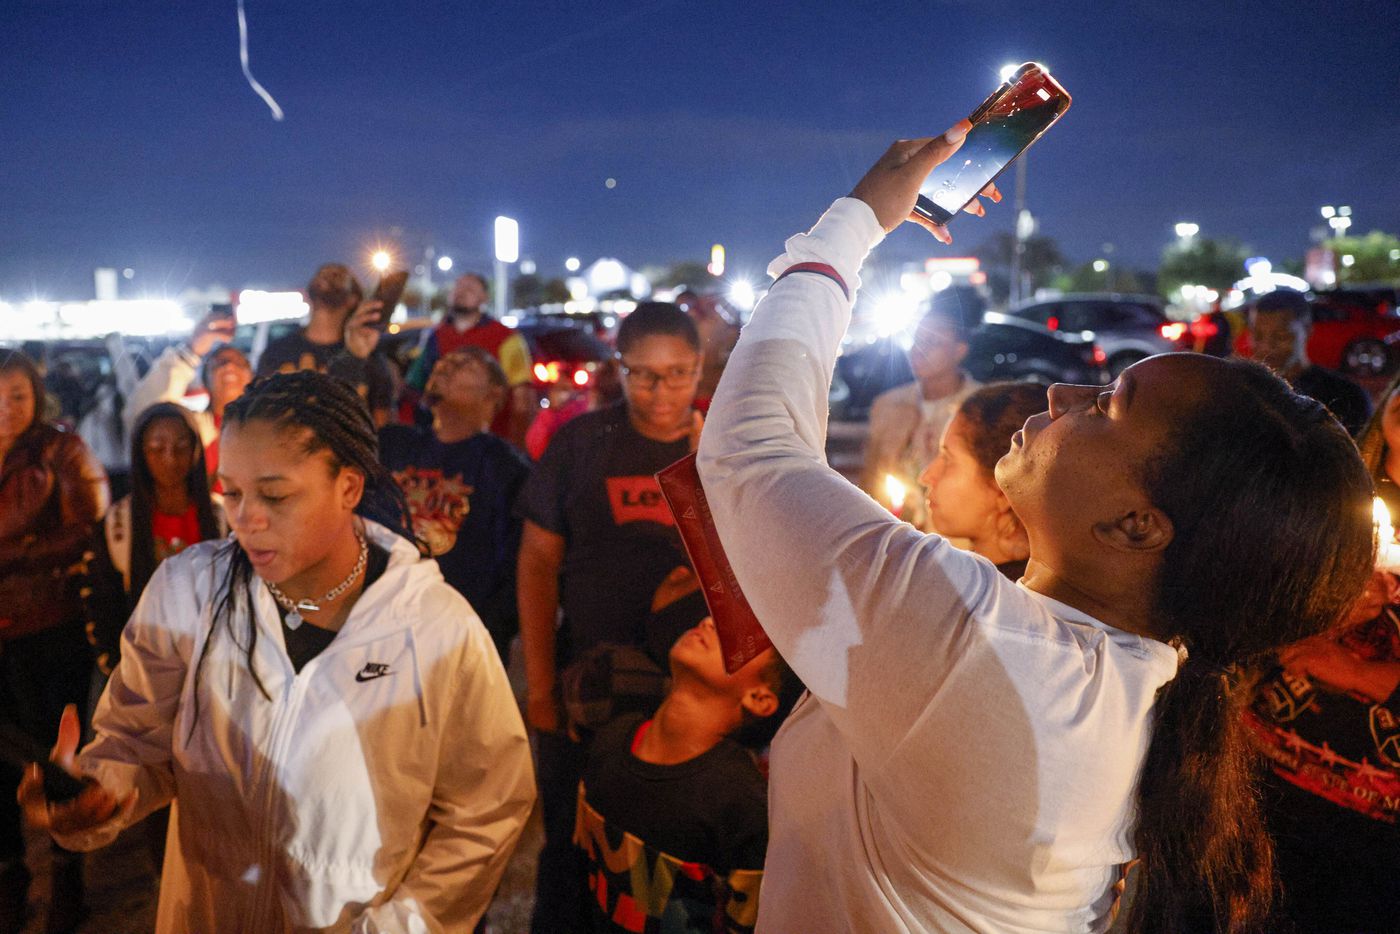 Monic Amor records a video after a balloon release in memory of 11-year-old De’Evan McFall...